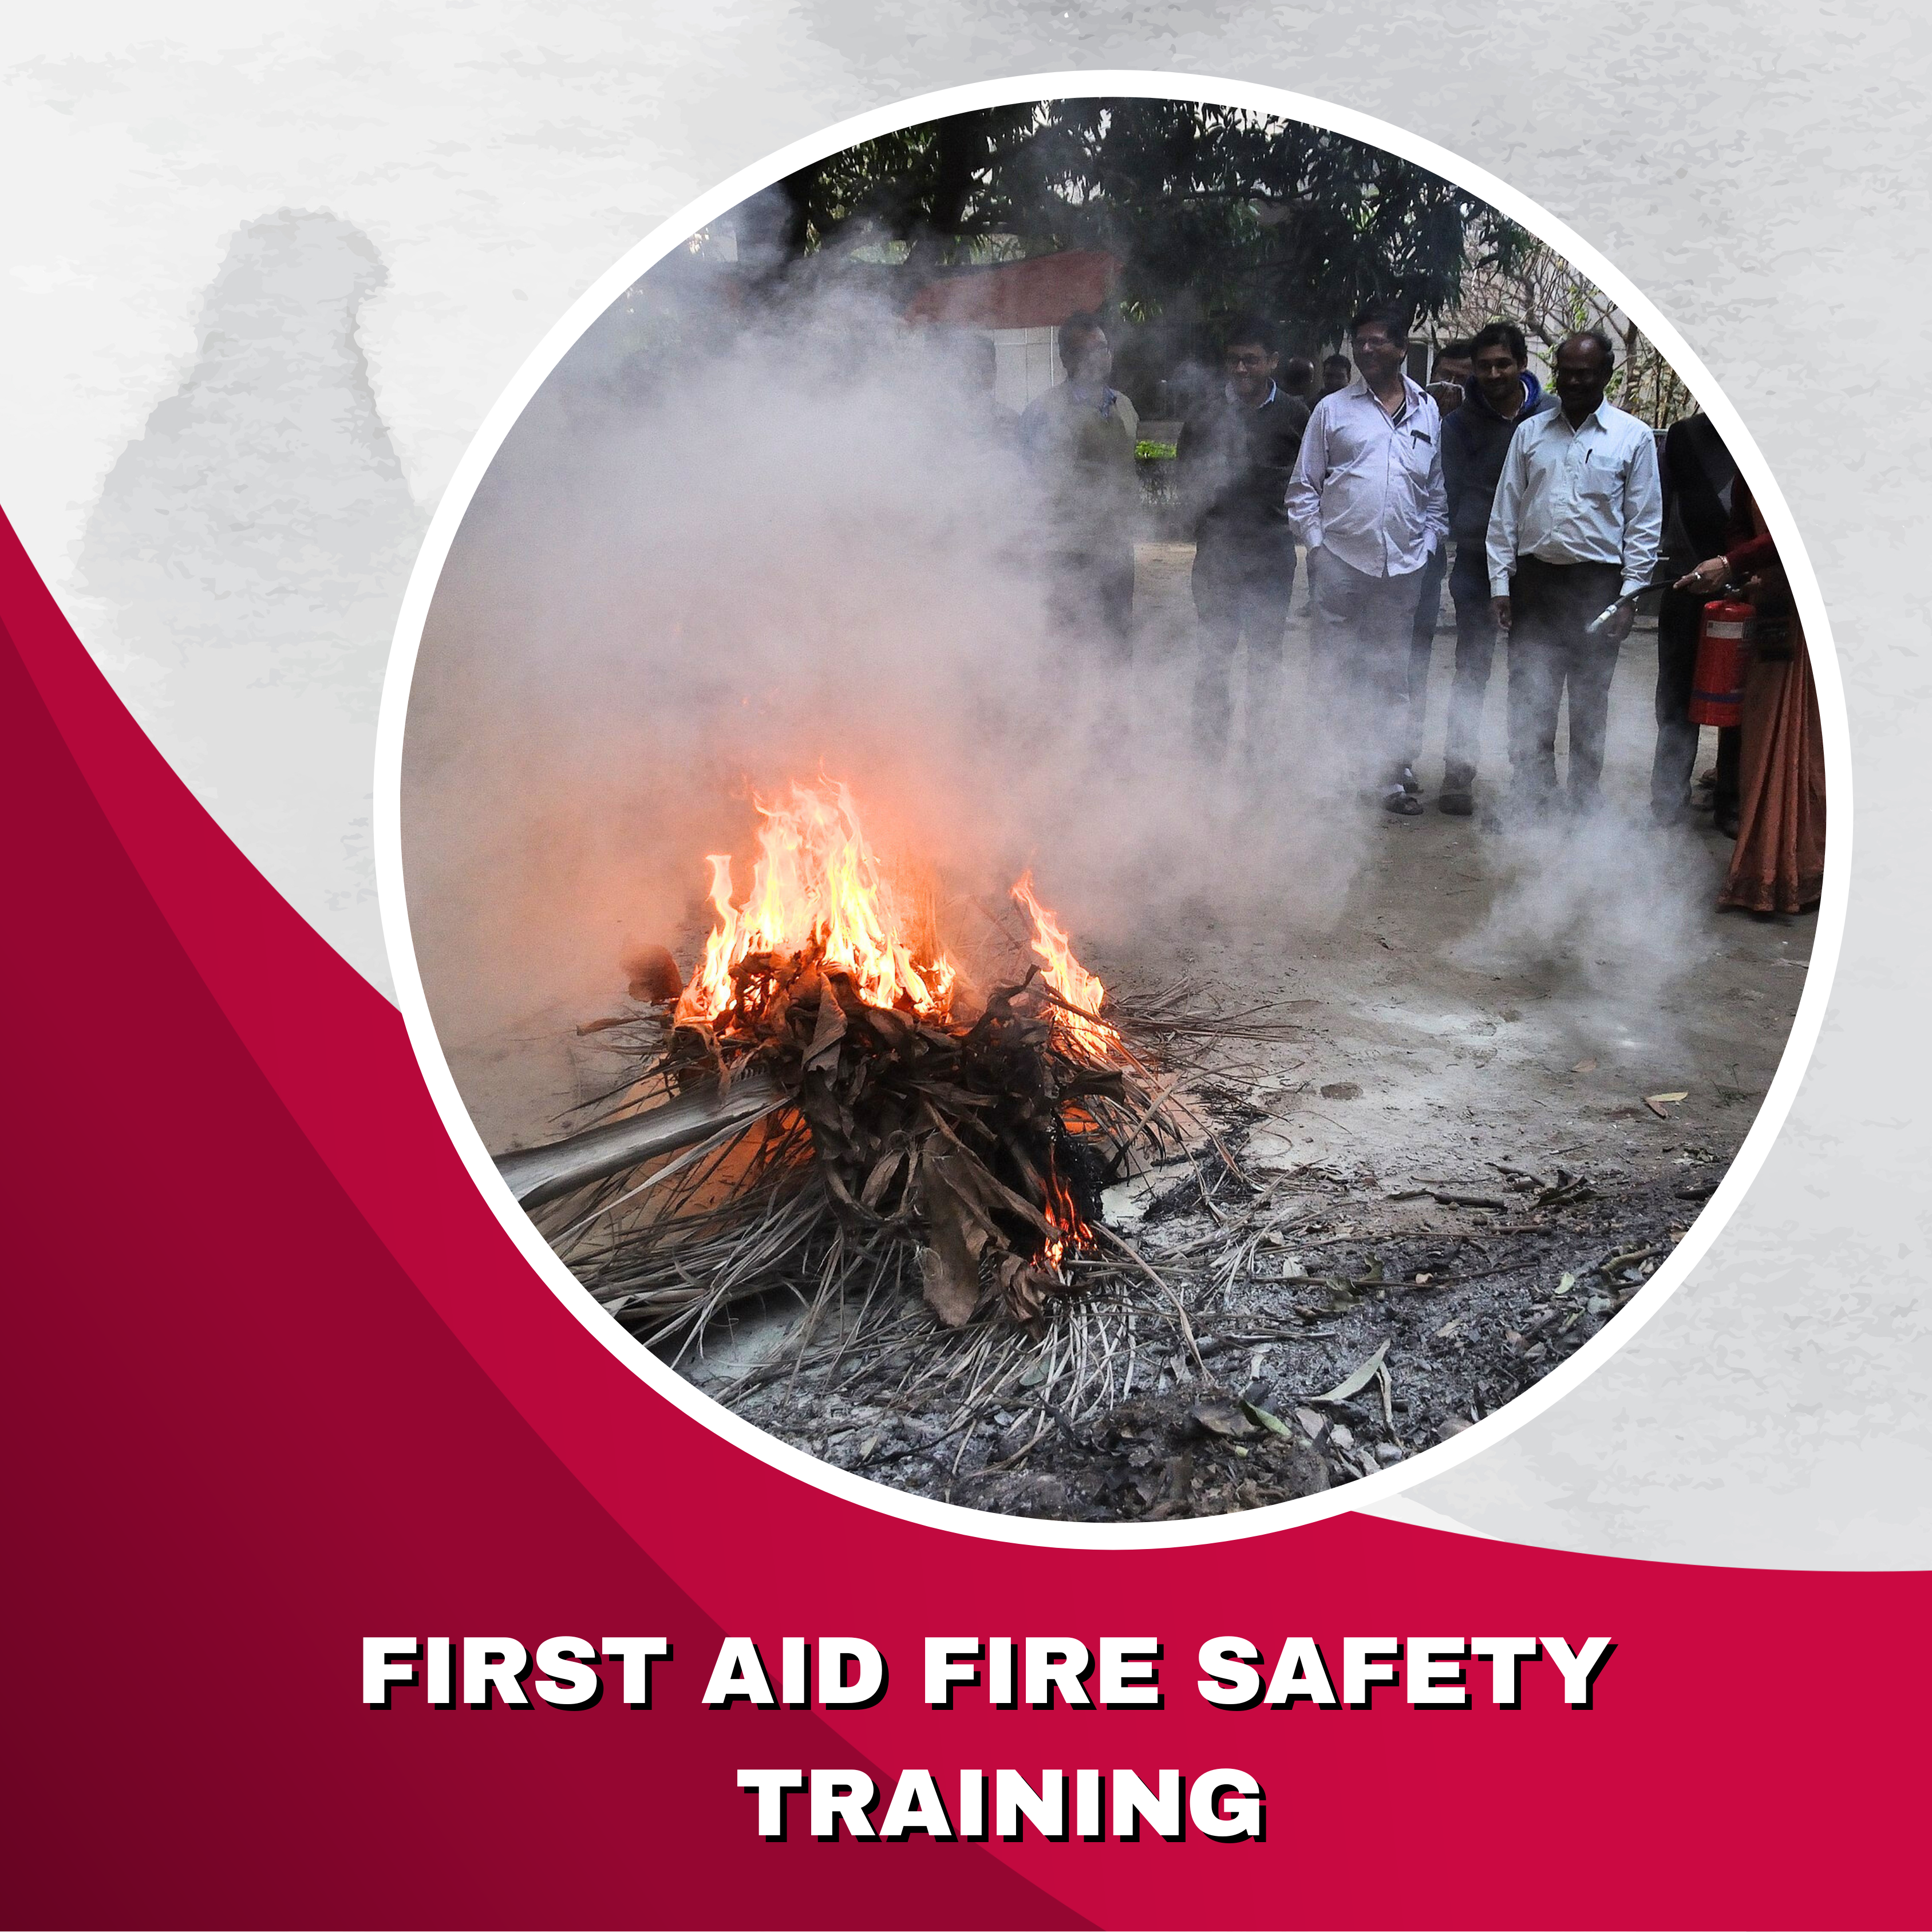 FIRST AID FIRE SAFETY TRAINING - FIRE CHAMPS